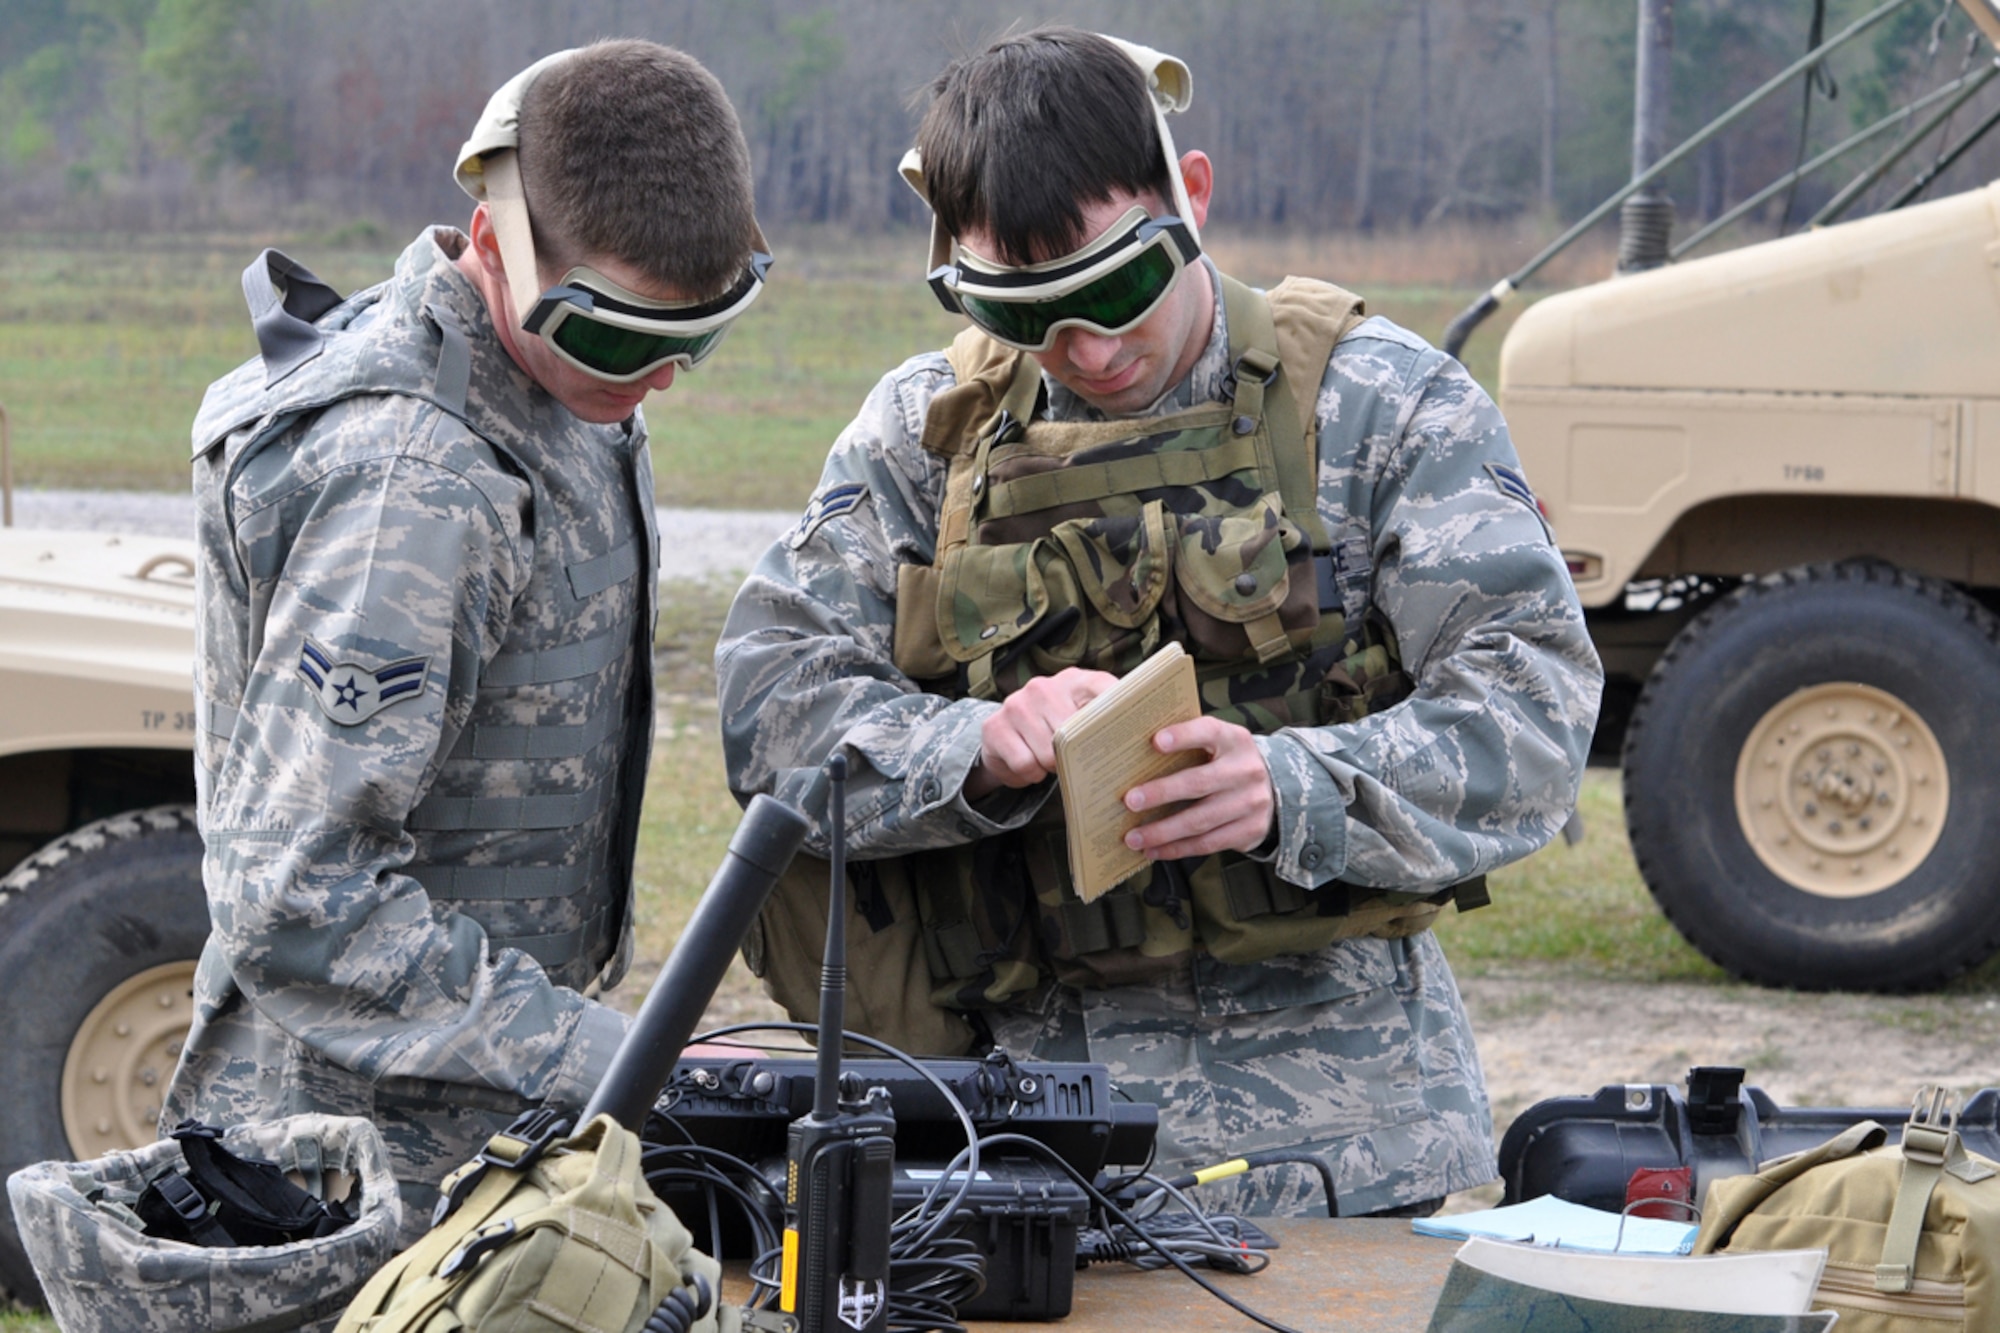 Airman 1st Class John Kingsley, radio operator maintainer and driver, 682nd Air Support Operations Squadron, Shaw Air Force Base, S.C., and Airman 1st Class Chad Hutsell, ROMAD, with the 15th ASOS, Ft. Stewart, Ga., work with a military rugged tablet (MRT) during “Patriot Dixie,” March 31, 2009. The MRT is a computer system that sends digital information to combat aircraft providing close-air-support much like text messaging. Both Airmen are involved in a 13 day training exercise for Joint Terminal Attack Controllers in the Savannah, Ga., area. (US Air Force photo/Tech. Sgt. Jeff Walston)